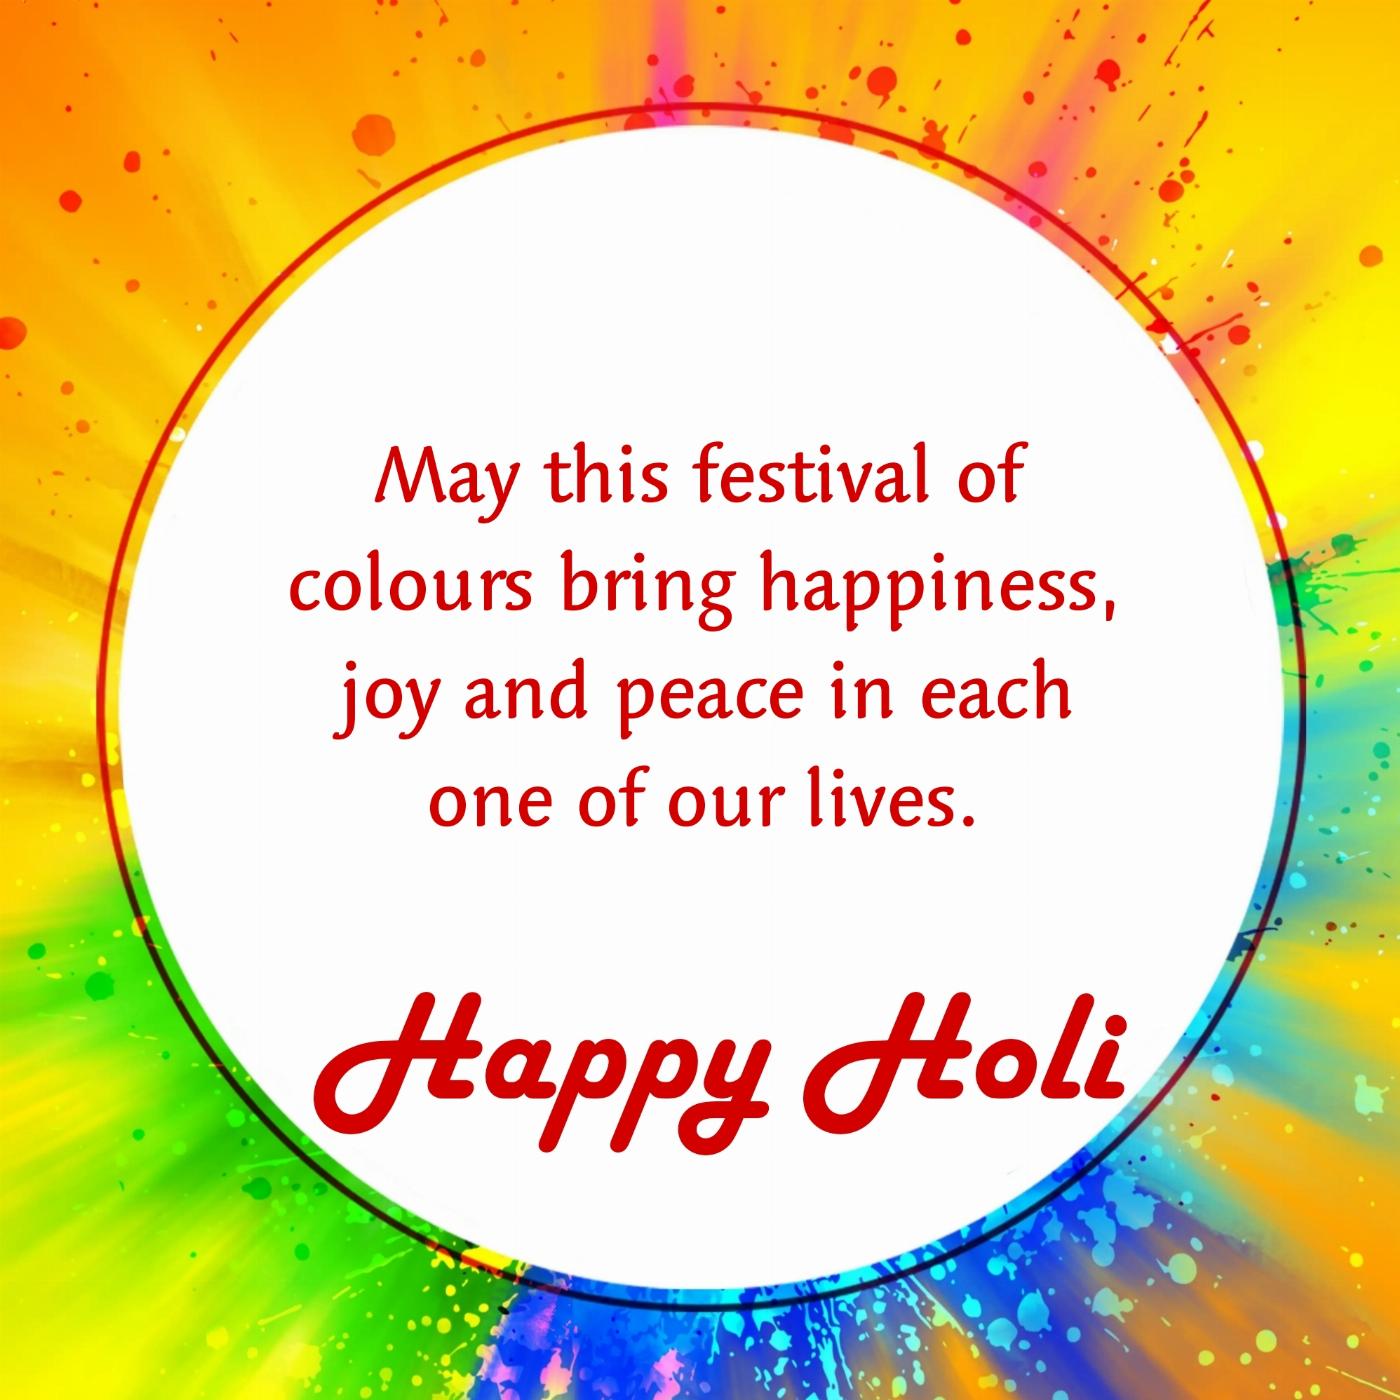 May this festival of colours bring happiness joy and peace in each one of our lives